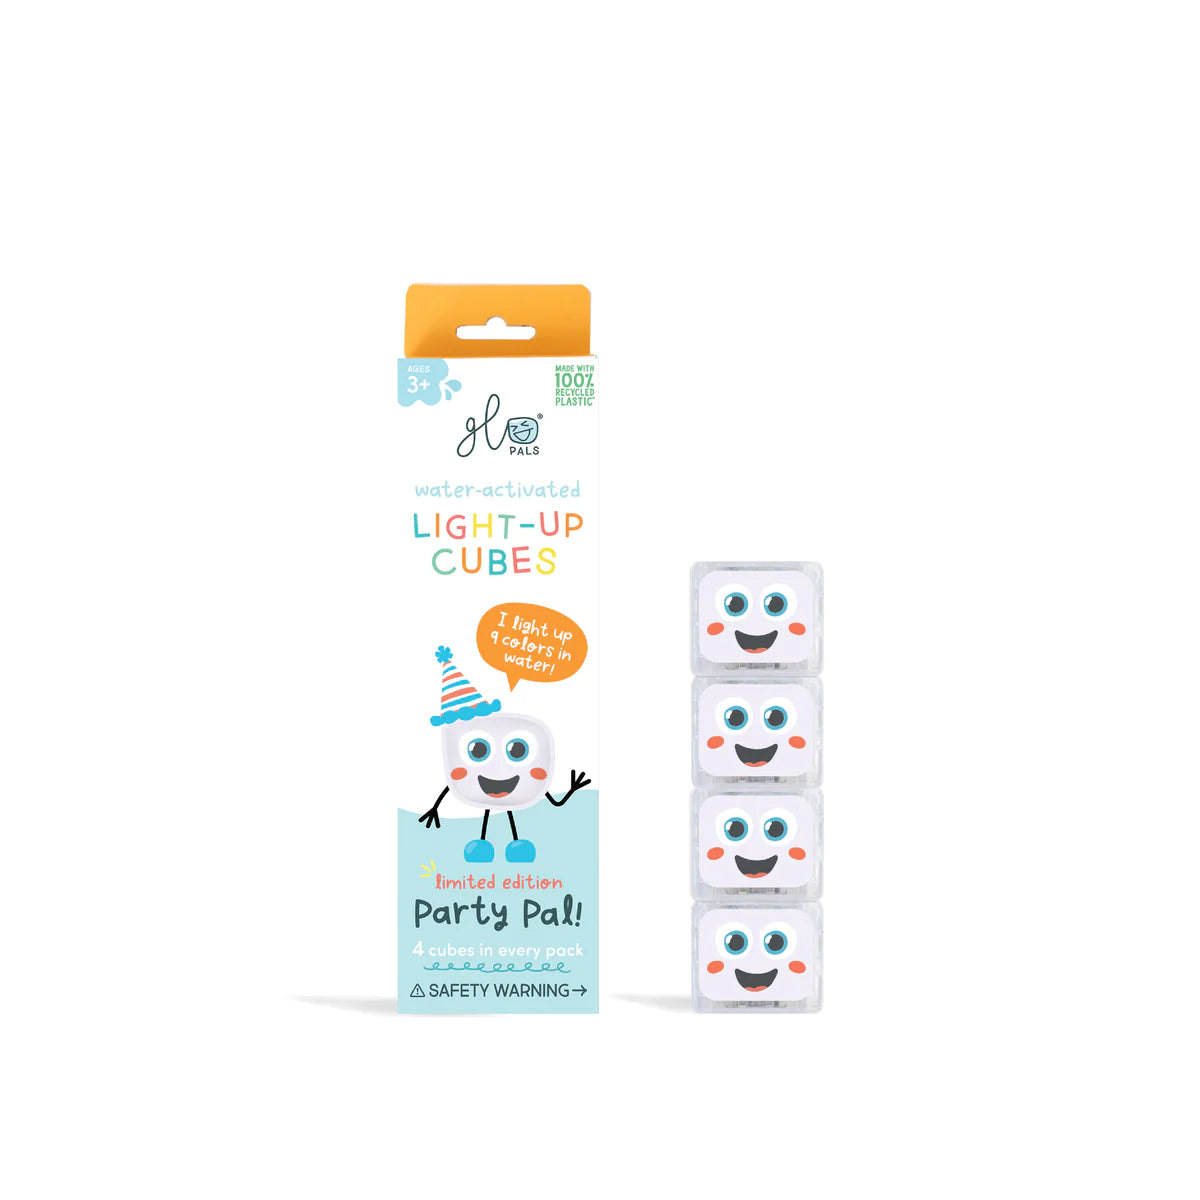 Party Pal Light Up Cubes By Glo Pals